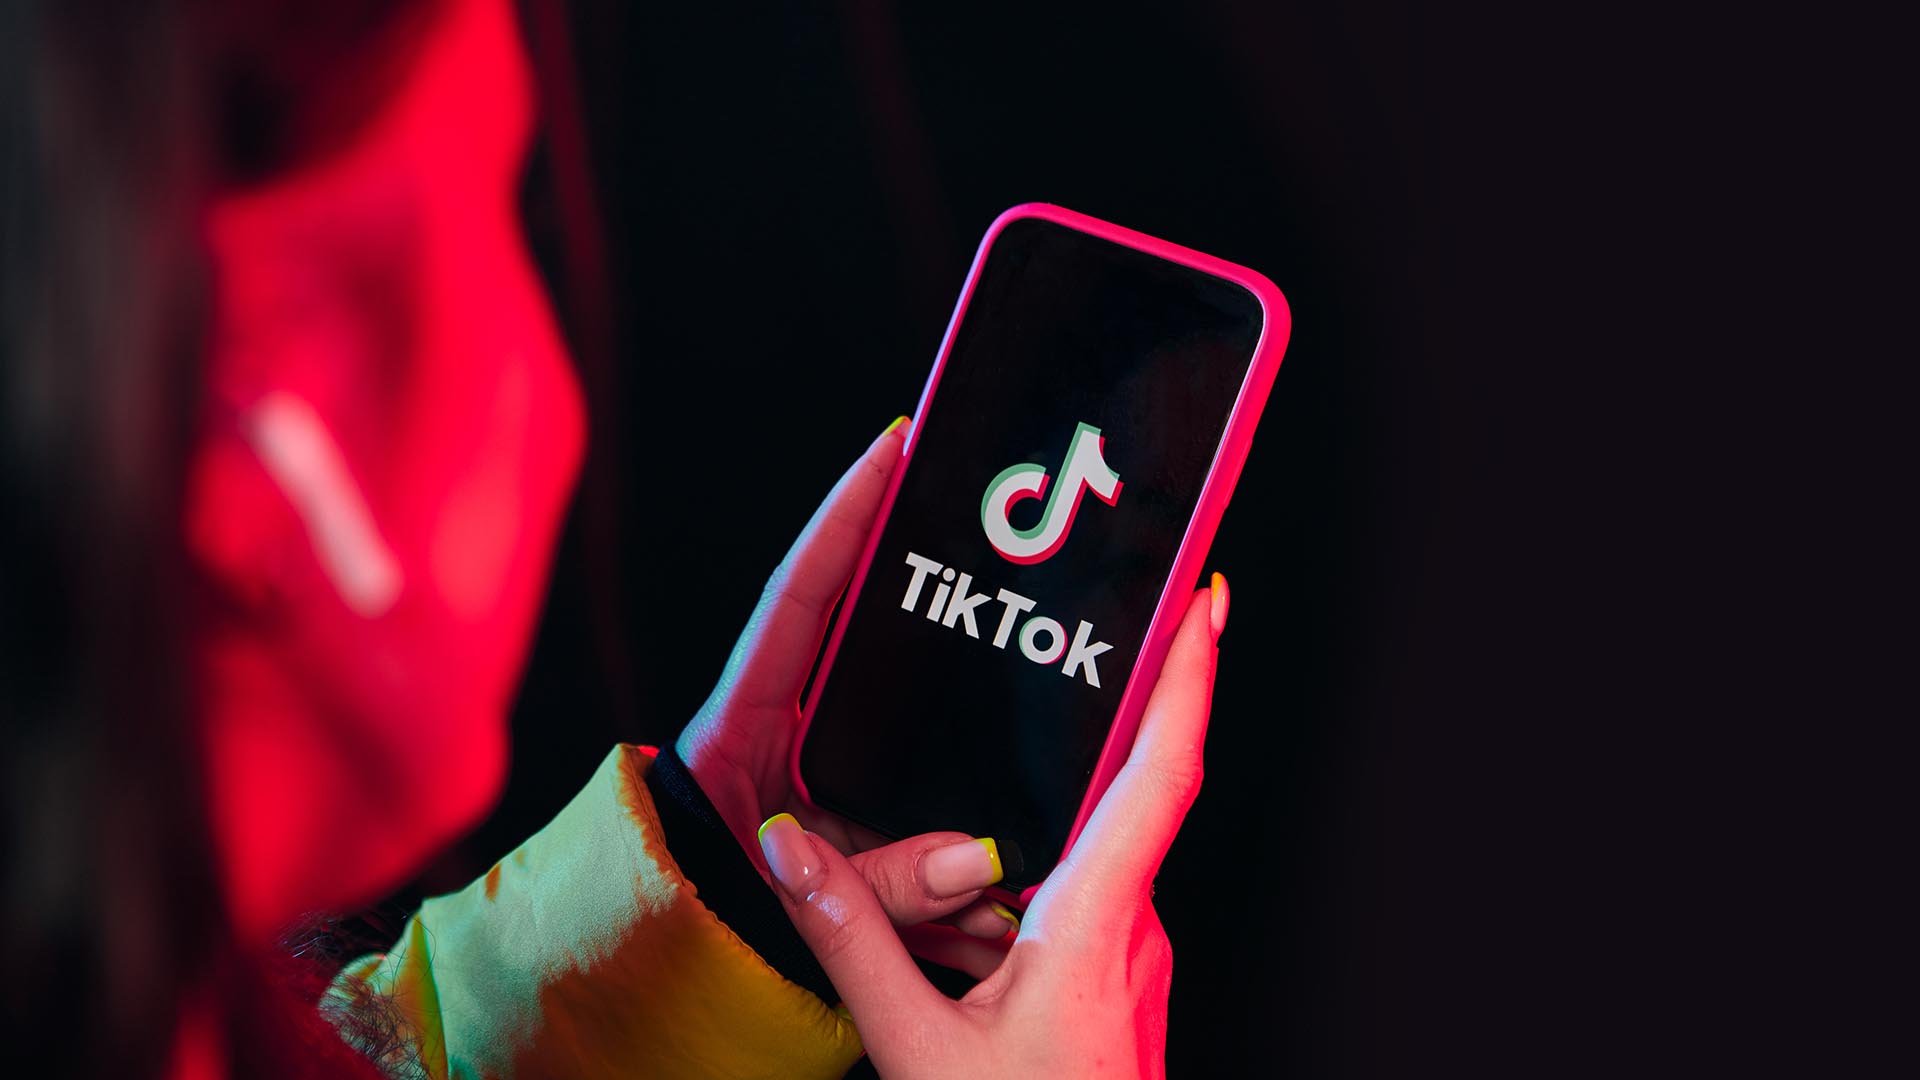 Should you be worried about TikTok?